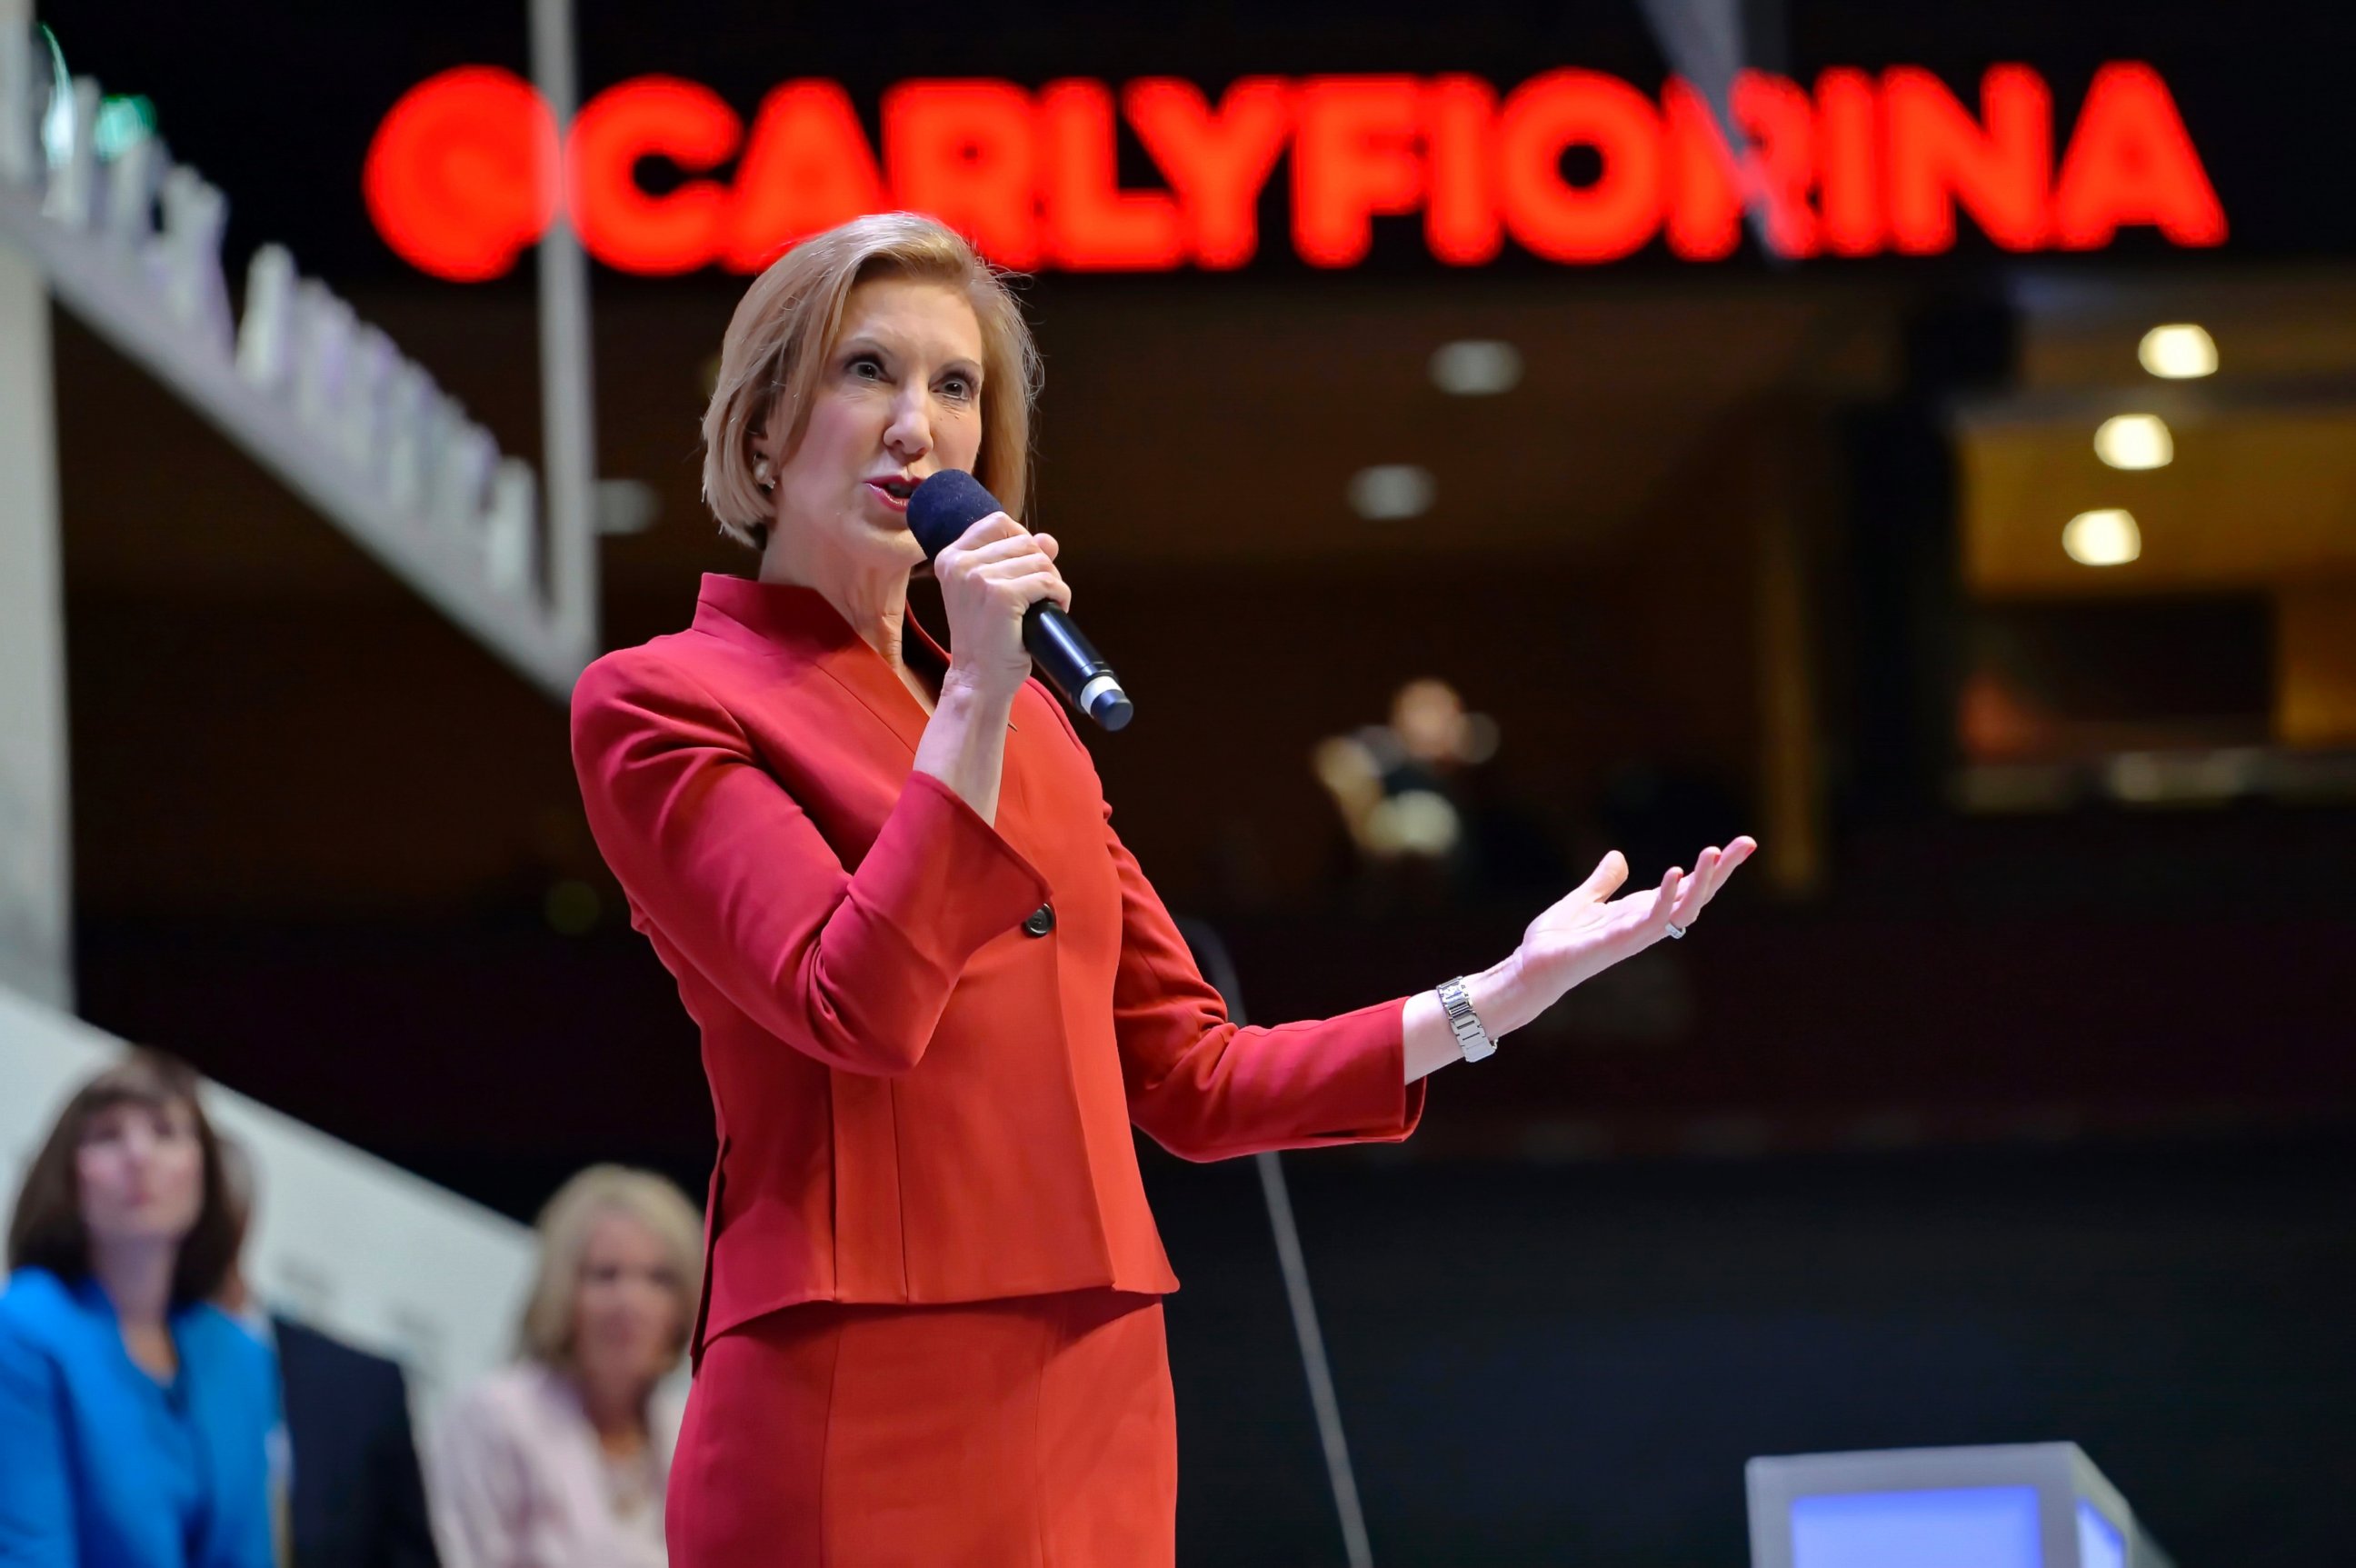 PHOTO: Republican presidential candidate Carly Fiorina speaks at a presidential forum sponsored by Heritage Action at the Bon Secours Wellness Arena, Sept. 18, 2015, in Greenville, S.C.